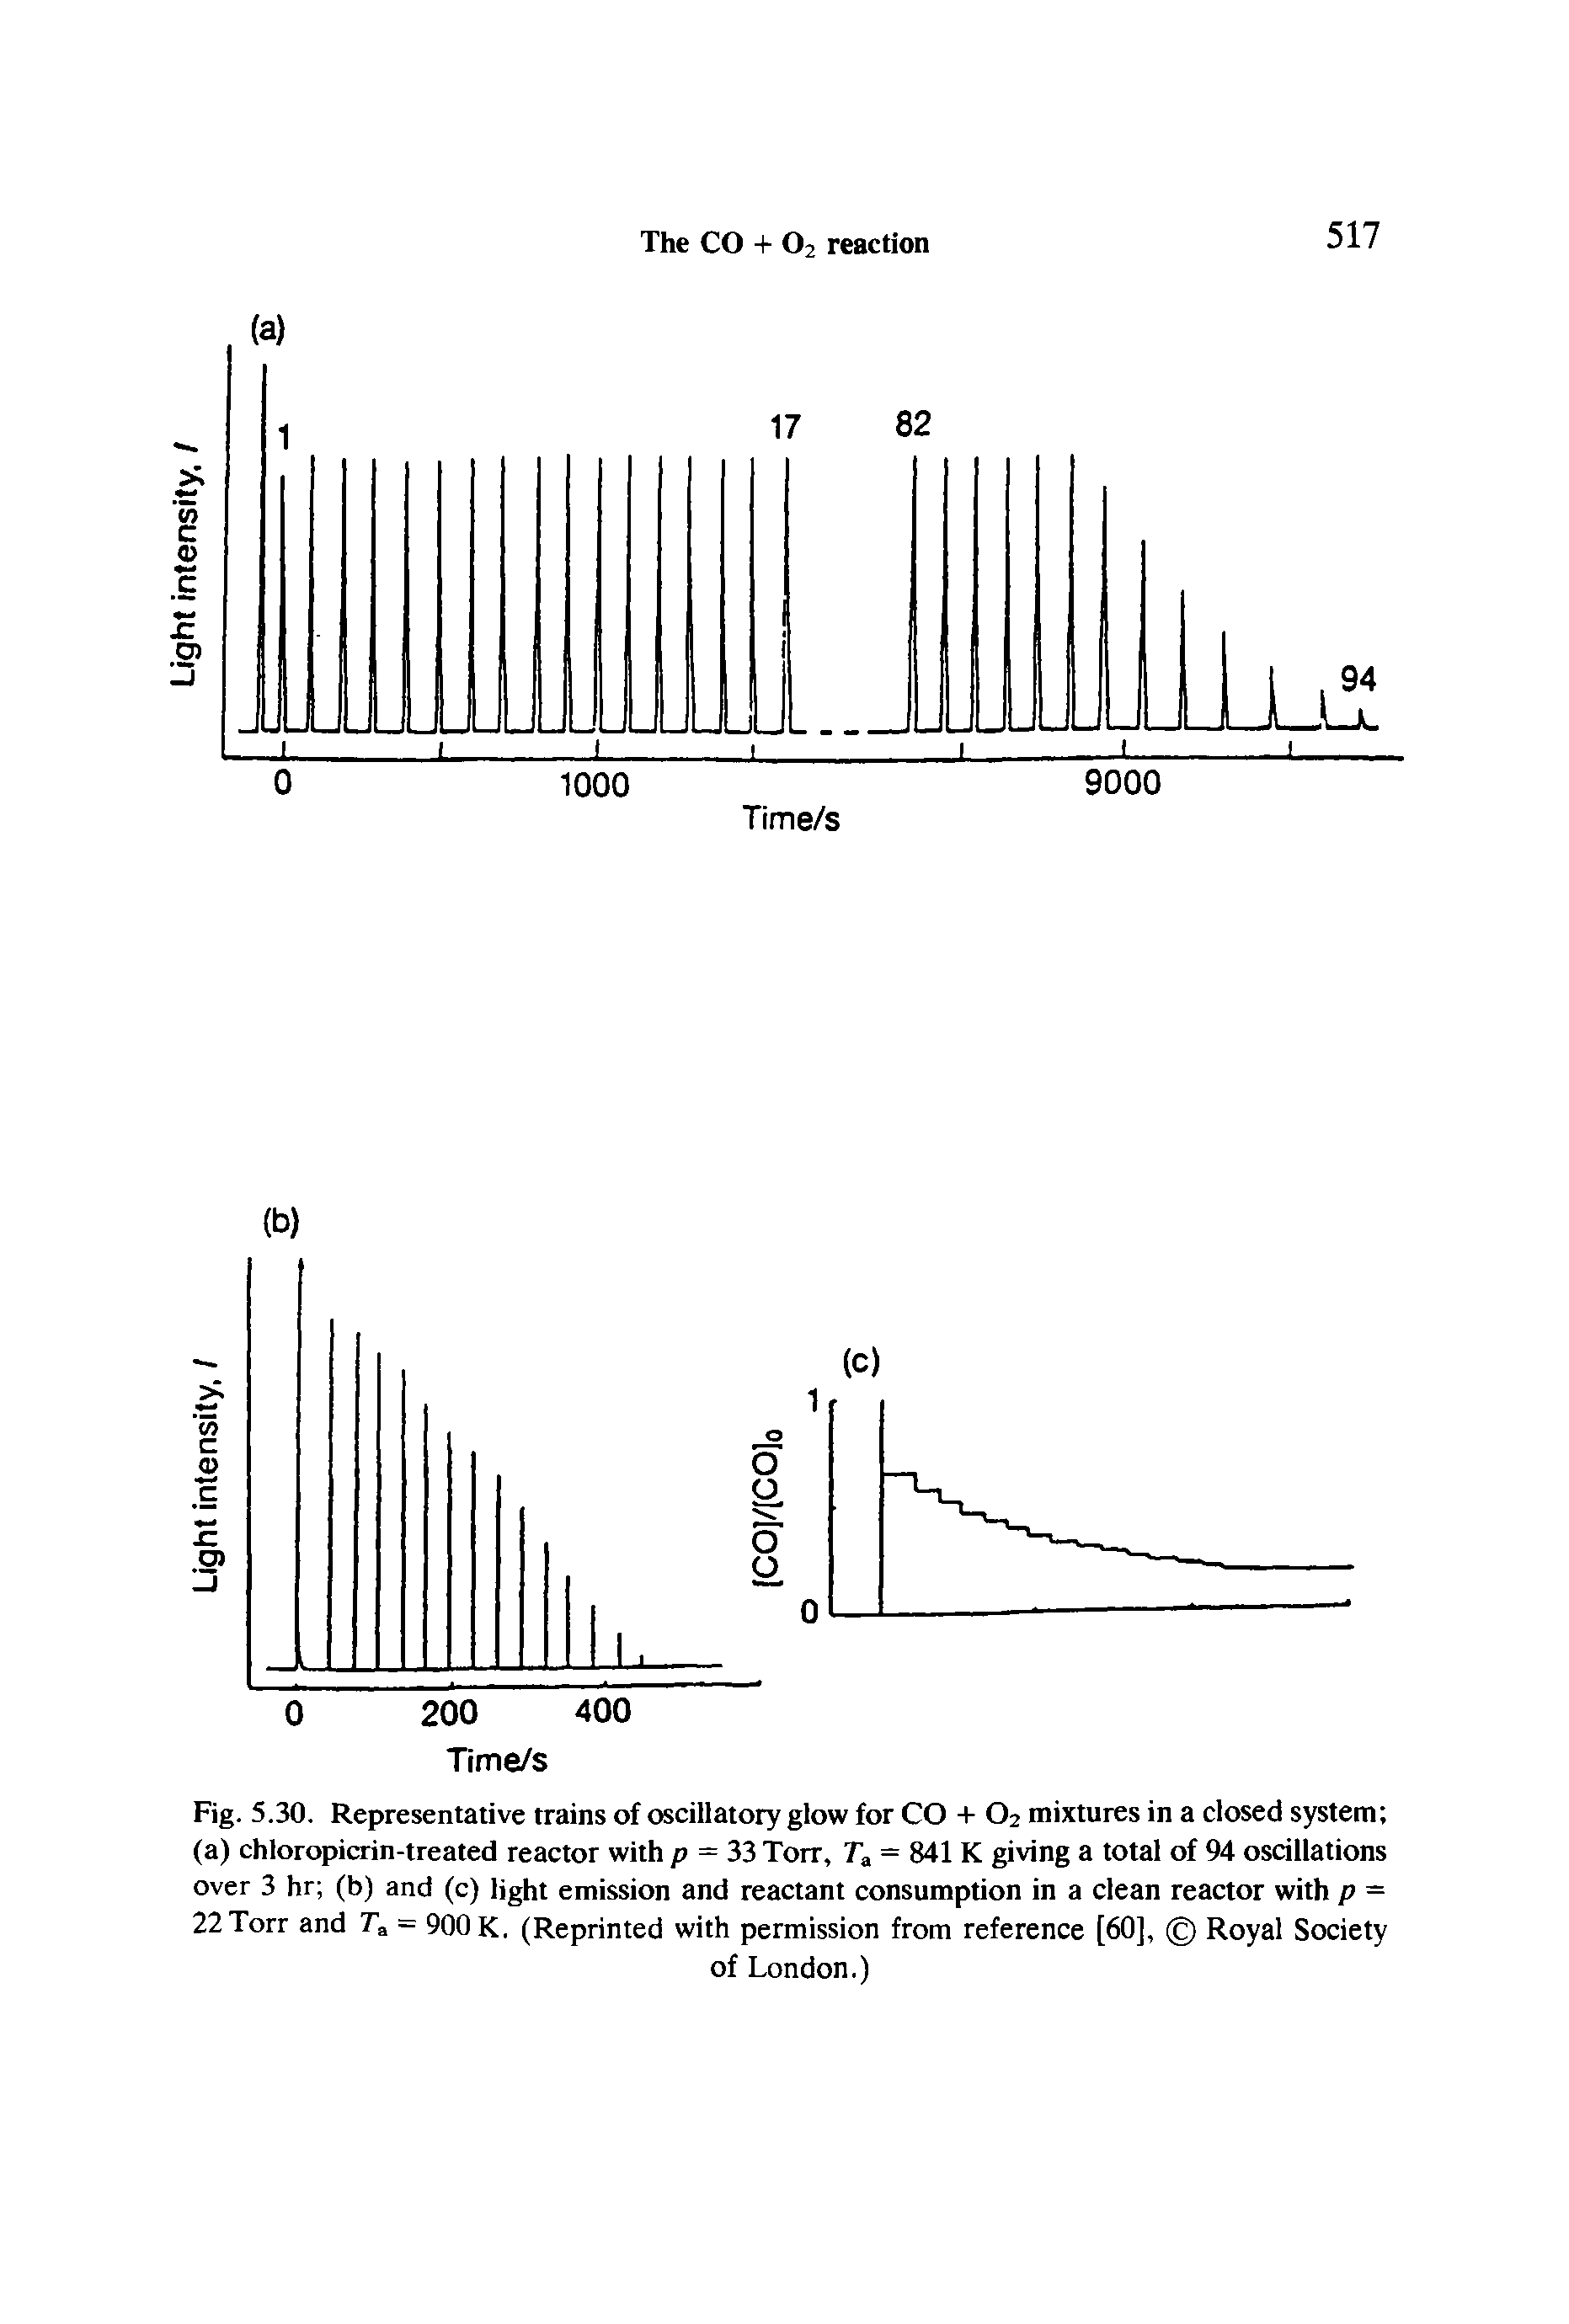 Fig. 5.30. Representative trains of oscillatory glow for CO + O2 mixtures in a closed system (a) chloropicrin-treated reactor with p = 33 Torr, = 841 K giving a total of 94 oscillations over 3 hr (b) and (c) light emission and reactant consumption in a clean reactor with p = 22 Torr and T, = 900 K. (Reprinted with permission from reference [60], Royal Society...